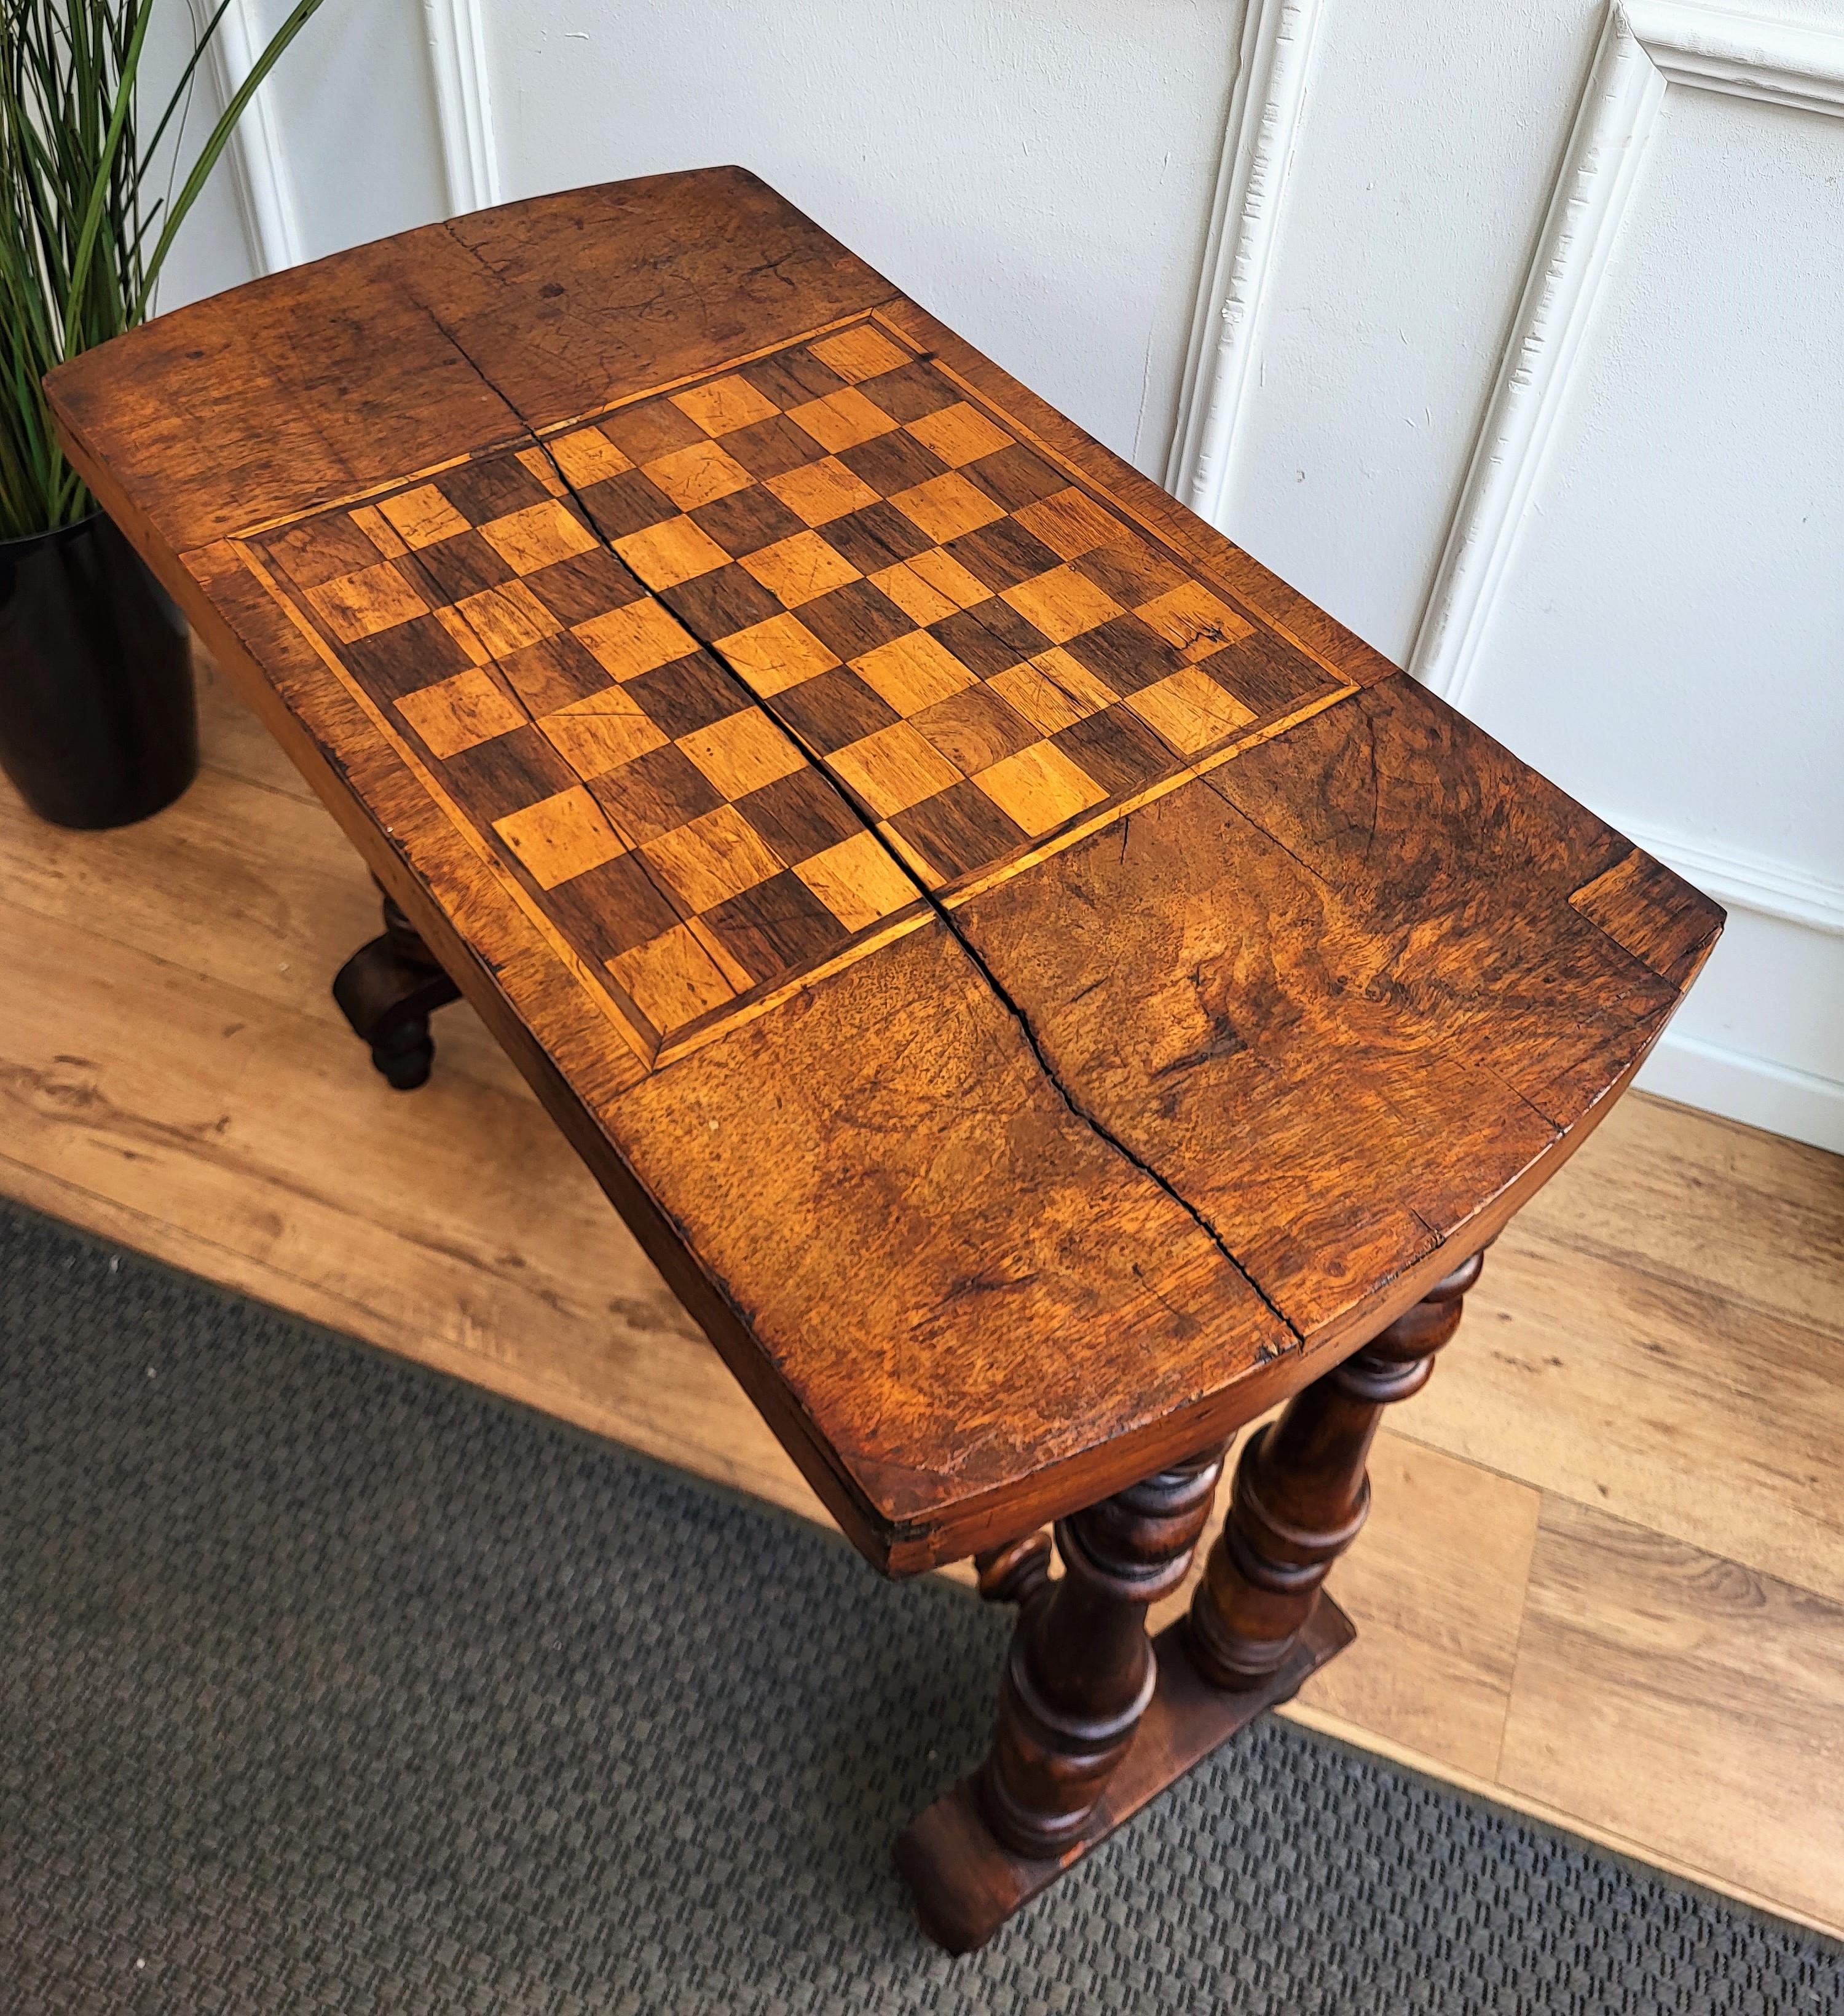 Antique Italian Walnut Burl Inlay Chess Games Side Table with Carved Legs 1